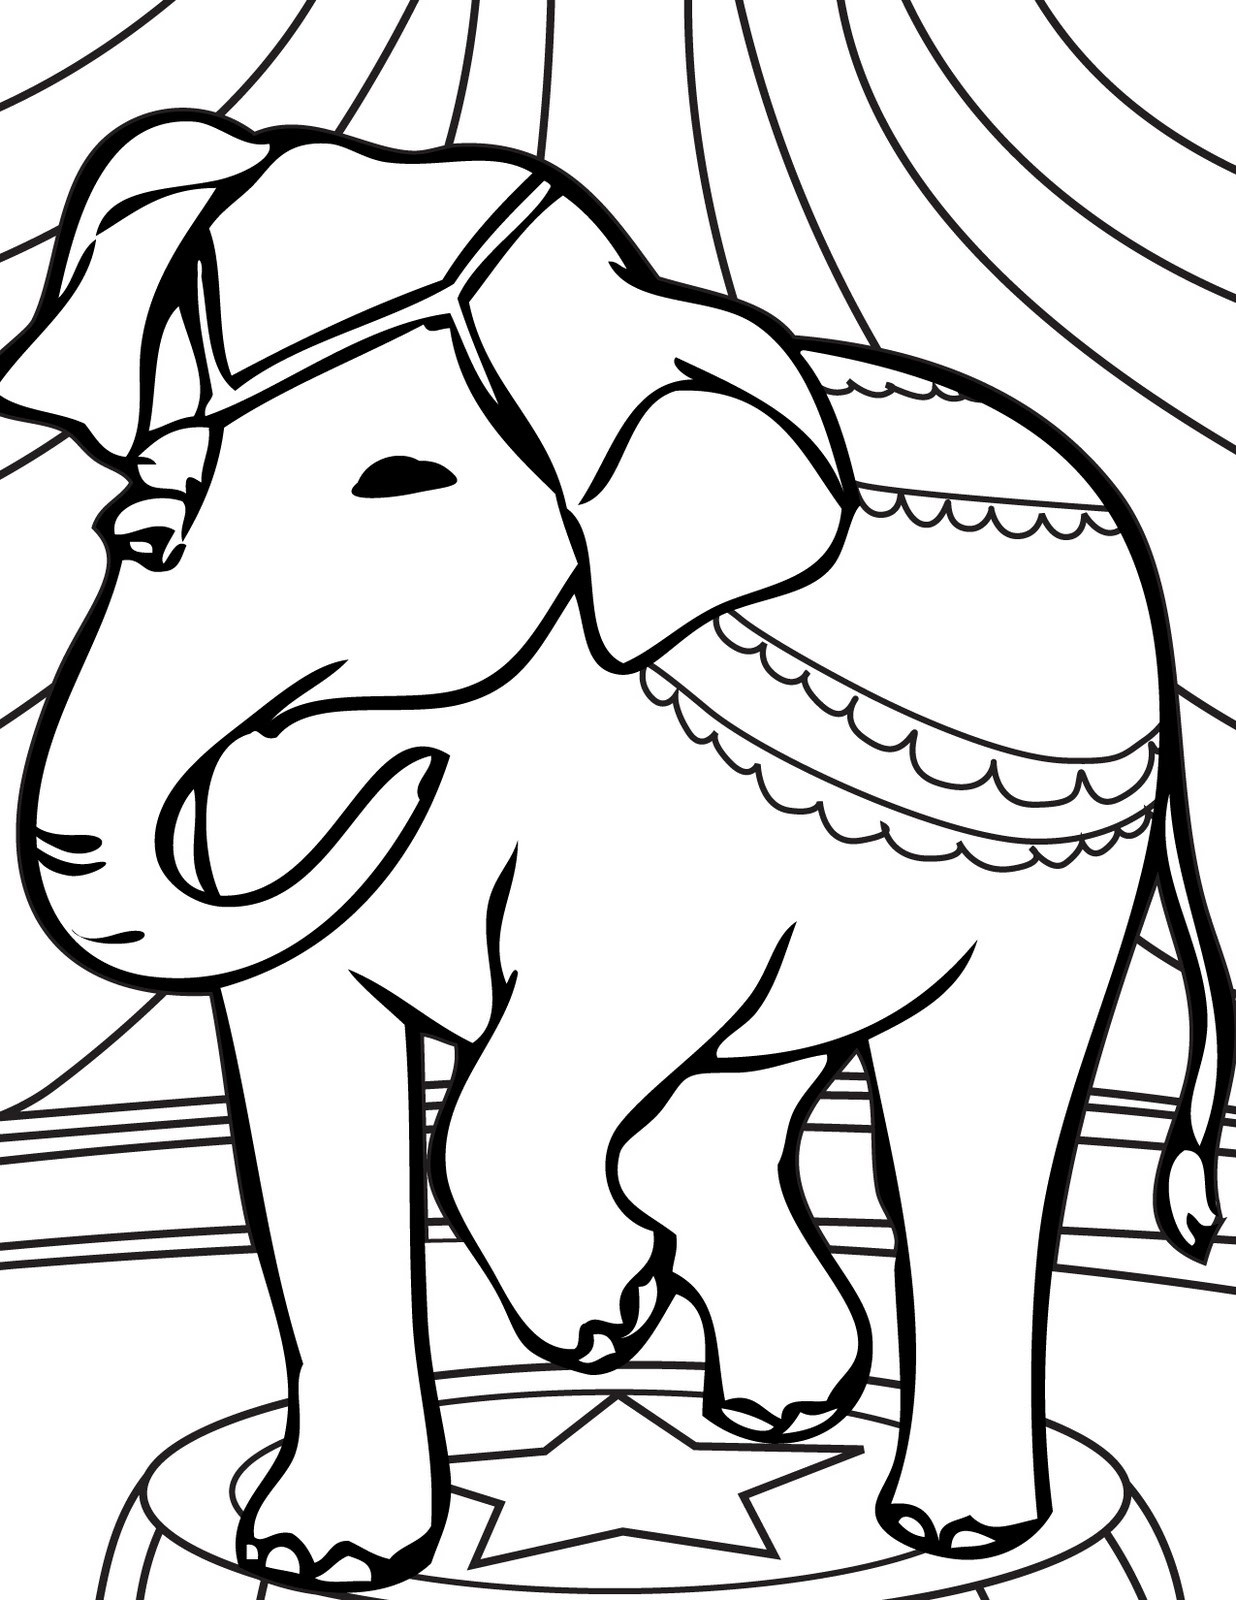 Elephant Coloring Pages For Kids
 transmissionpress Circus Elephant Coloring Pages